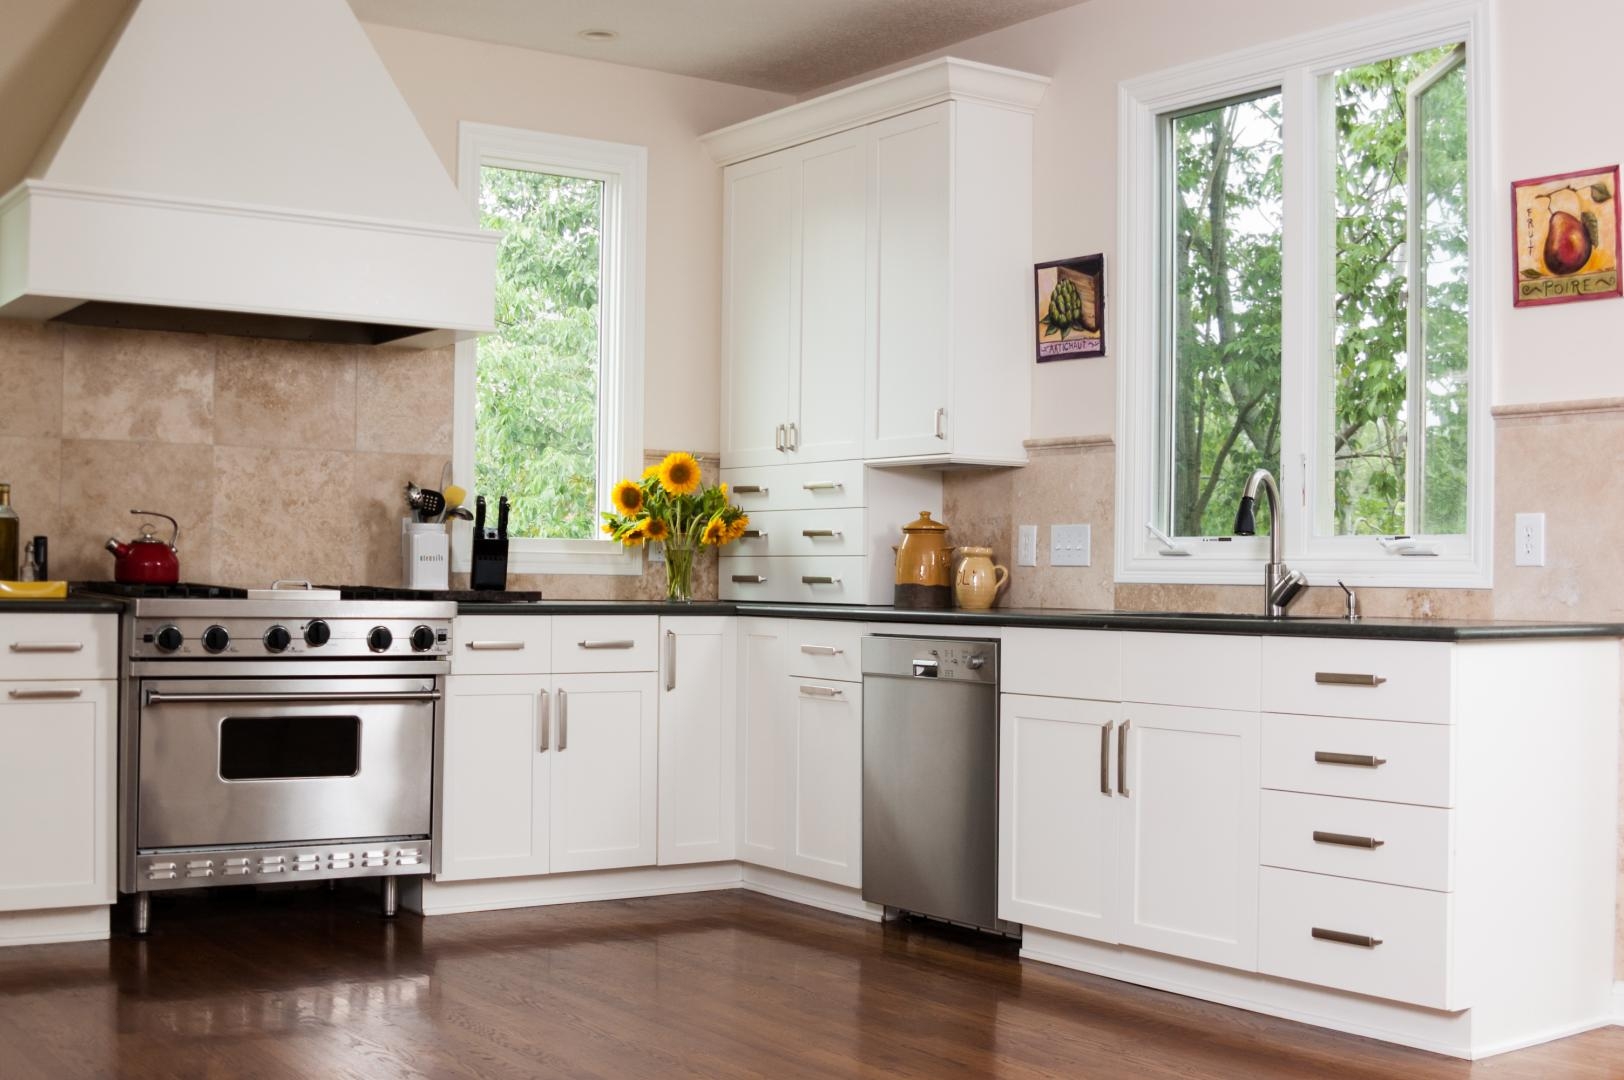   Jackie’s Kitchen &amp; Bath Design   We design thoughtful, livable spaces.   View Our Work  